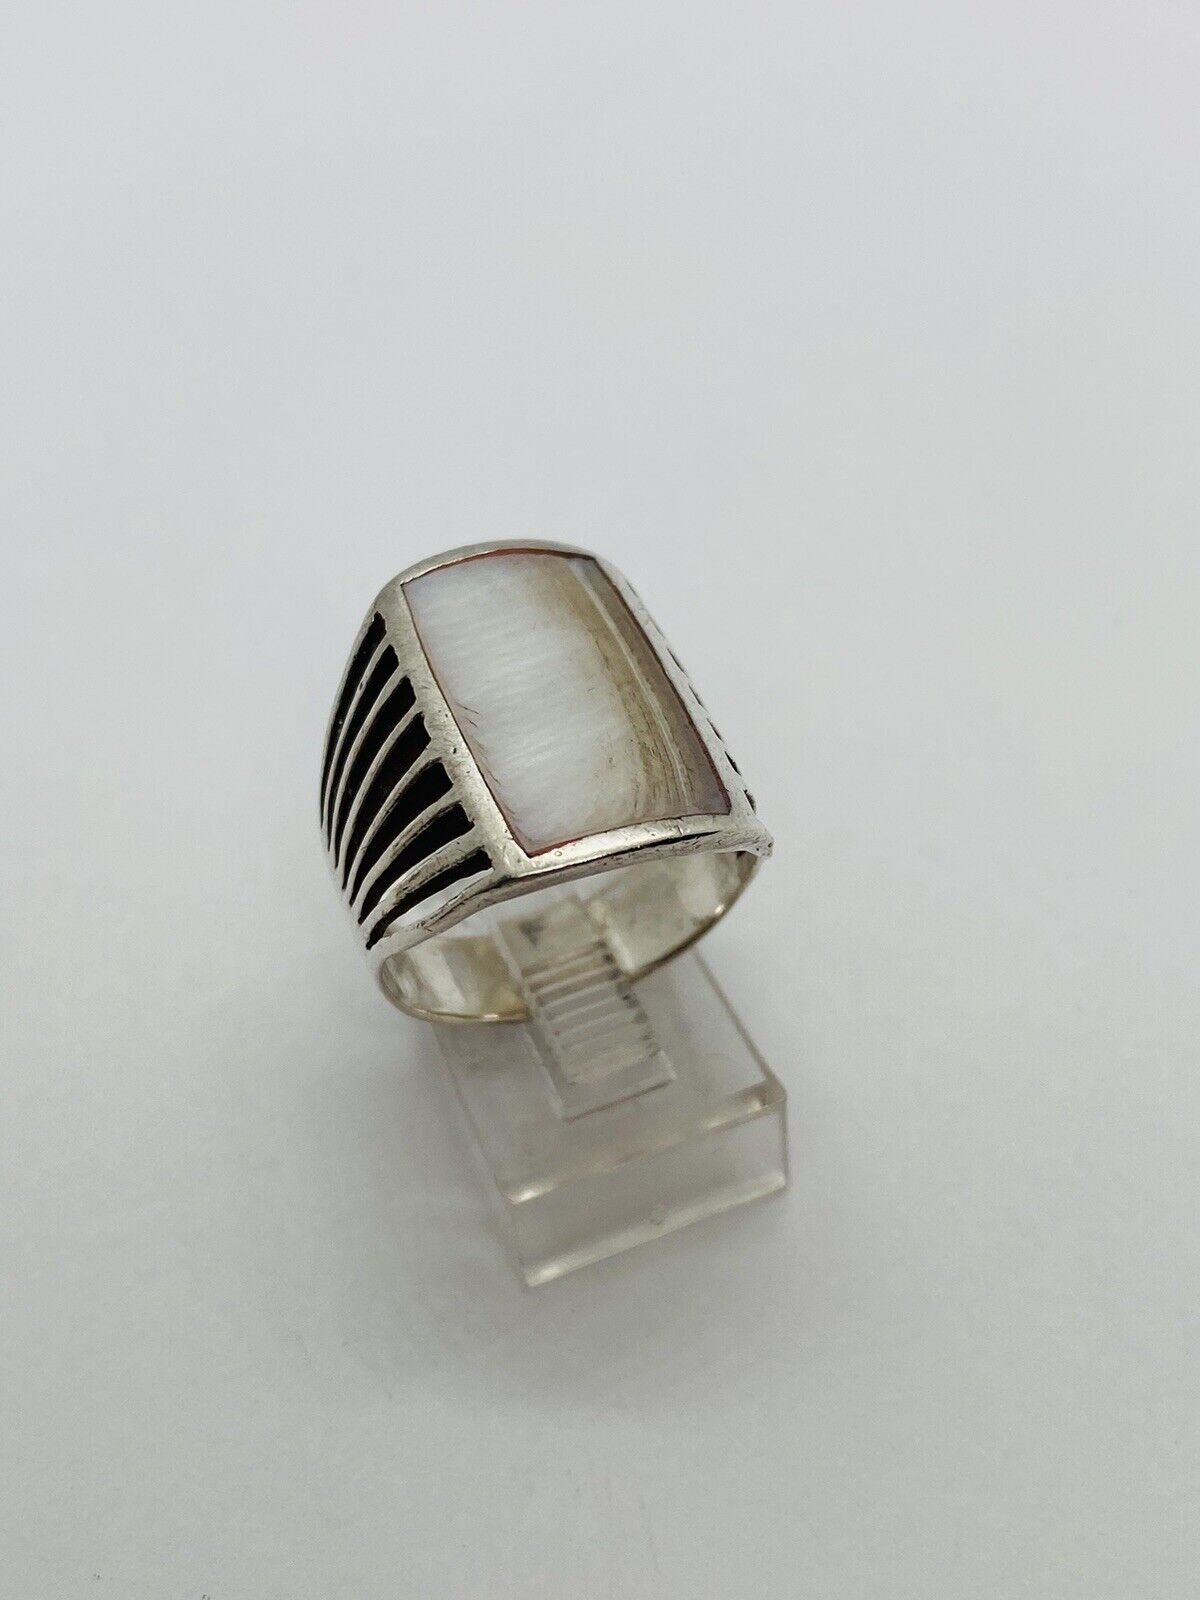 SIZE 7 4.7g 925 STERLING SILVER MOTHER OF PEARL SPRAY BAND FINE RING STAMPED